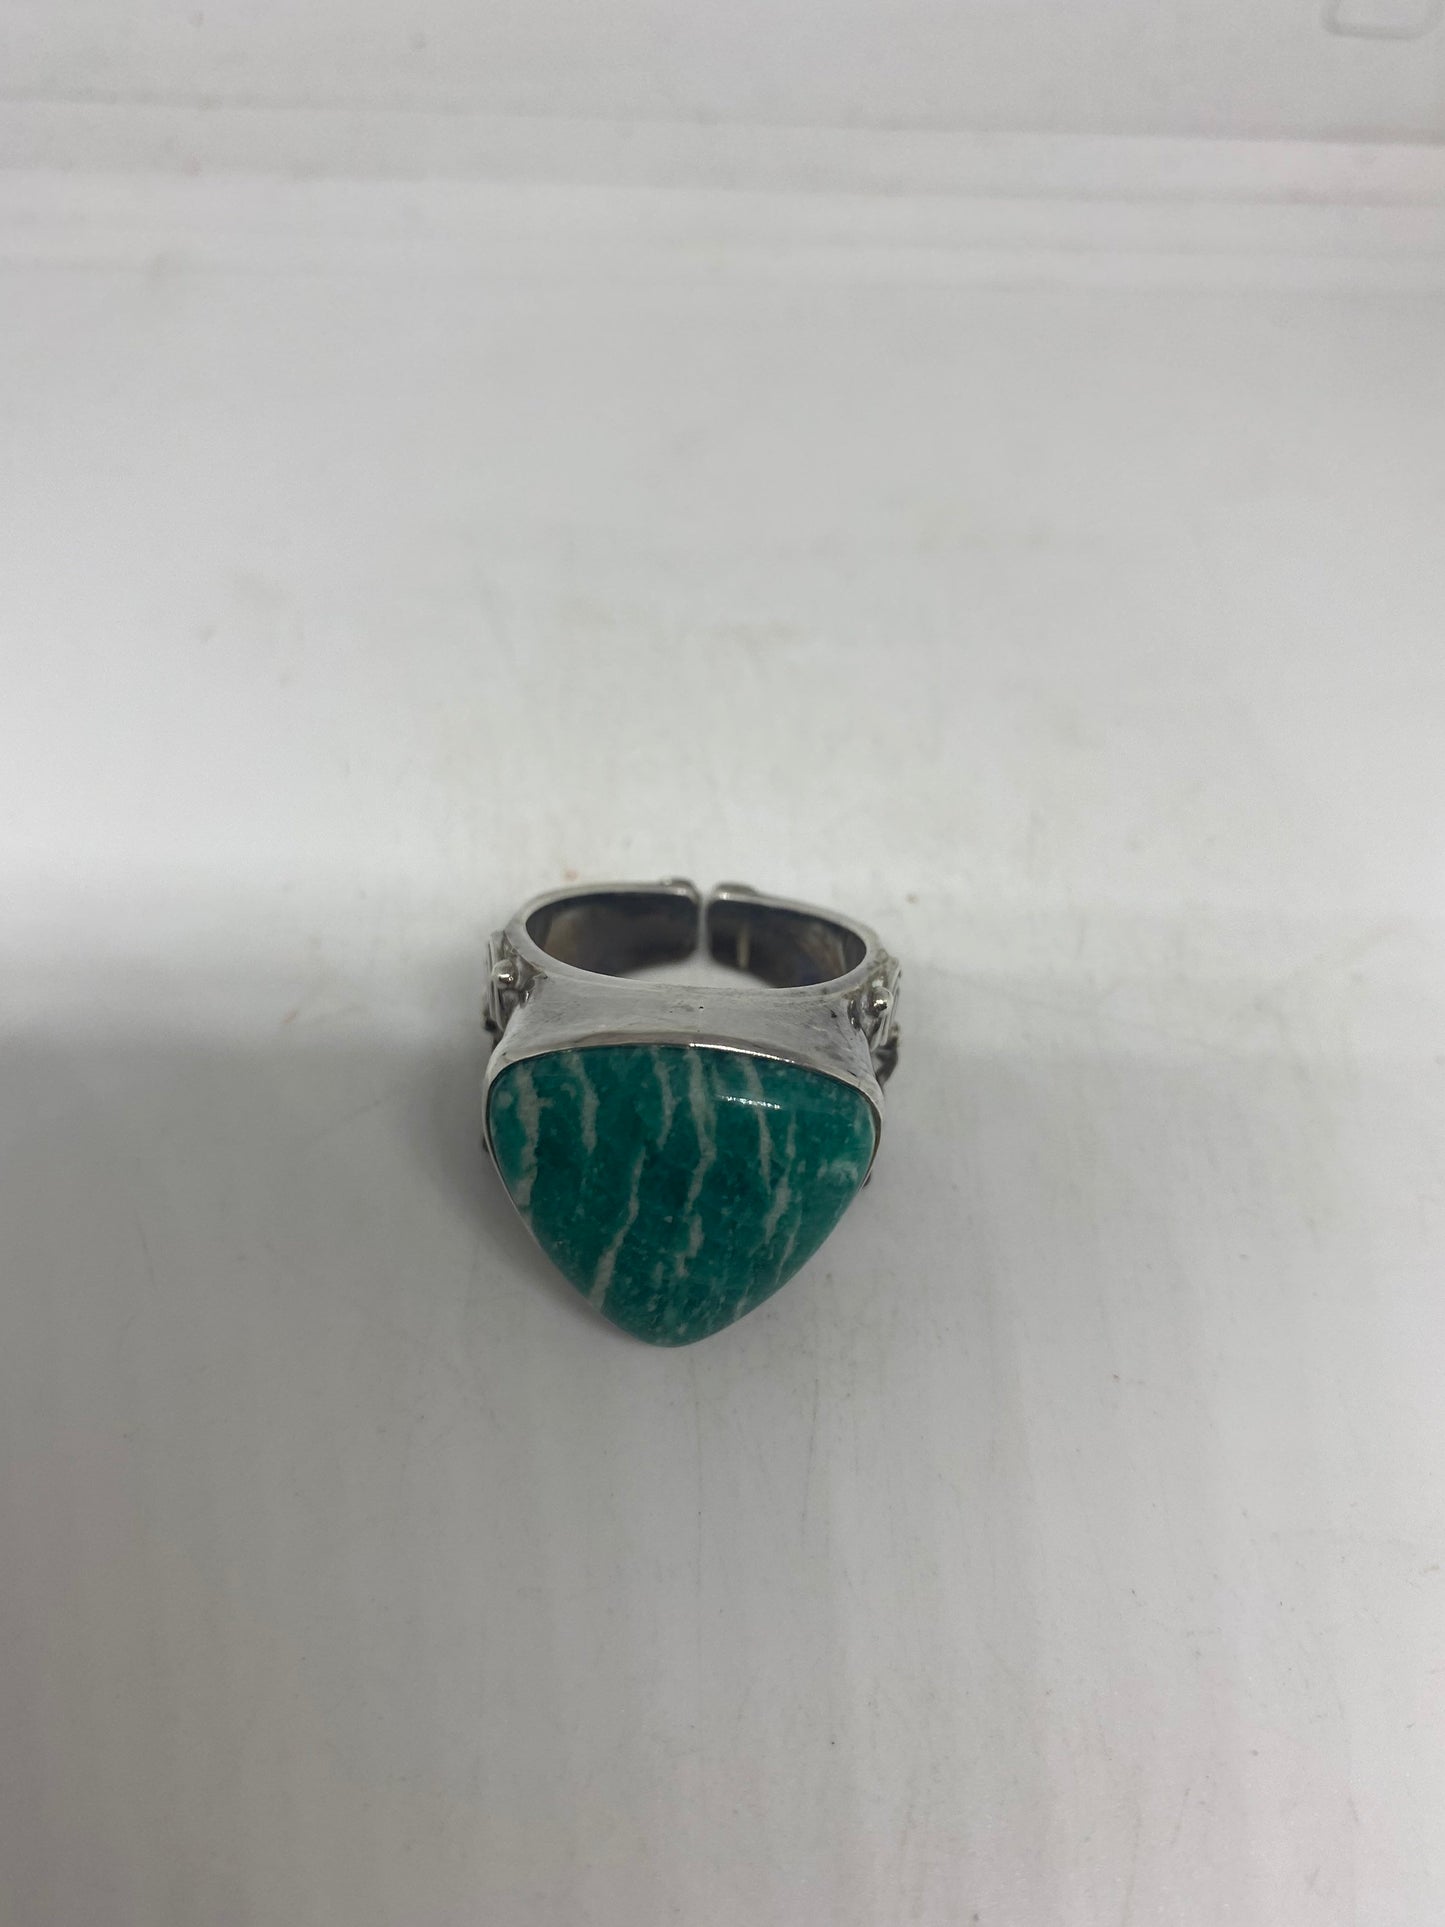 Vintage Green Ammonite Ring 925 Sterling Silver Size 10